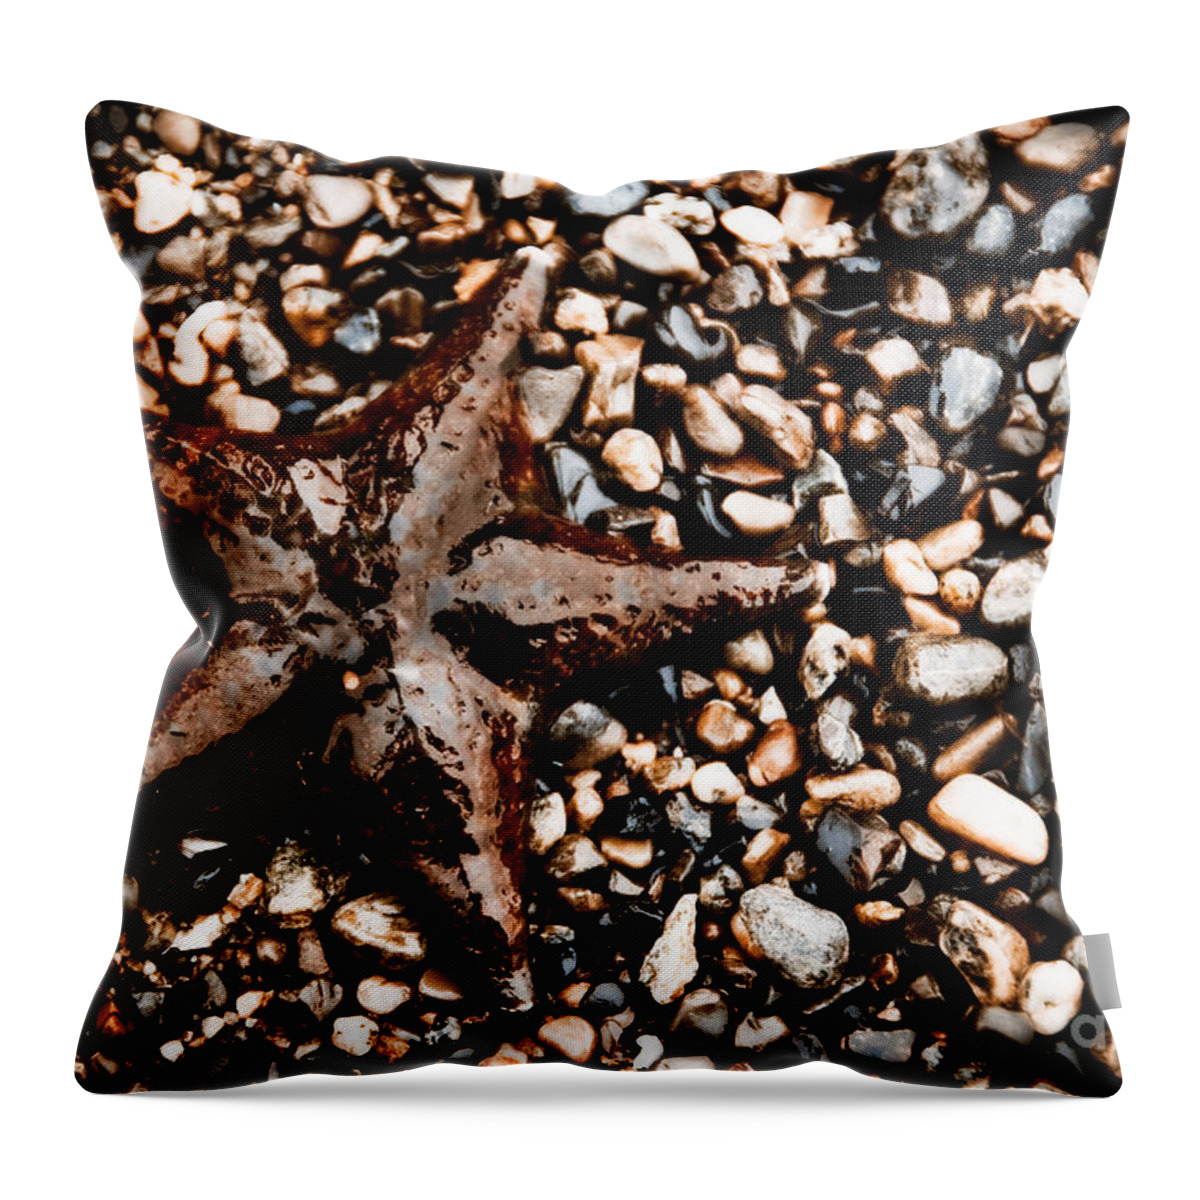 Beauty In Nature Throw Pillow featuring the photograph Stranded Sea Star by Venetta Archer